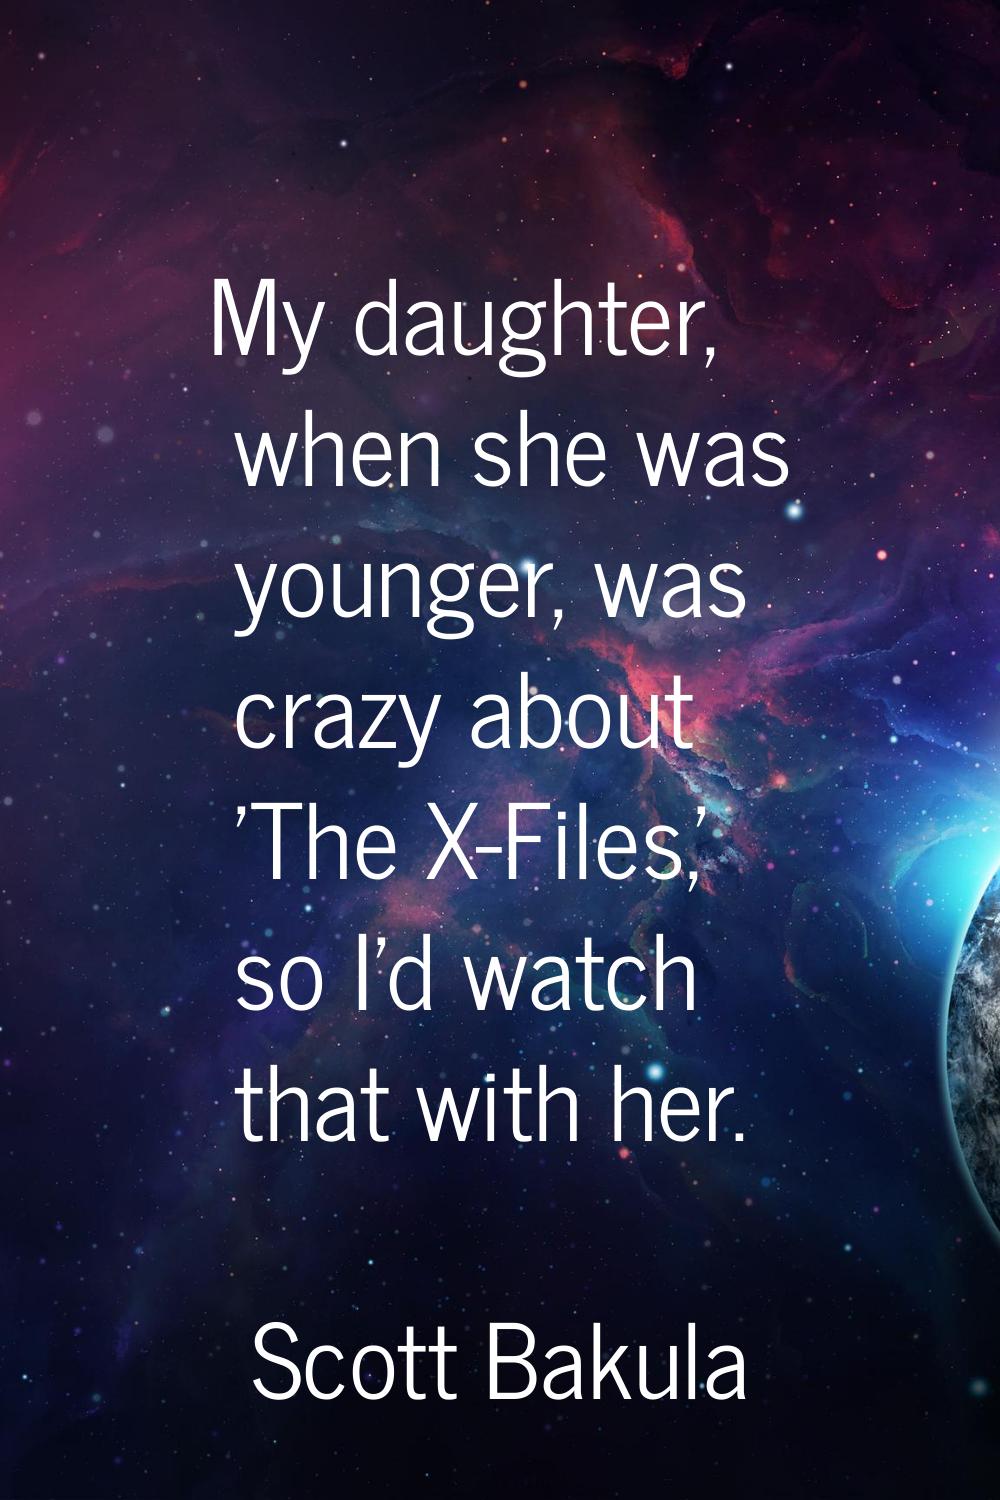 My daughter, when she was younger, was crazy about 'The X-Files,' so I'd watch that with her.